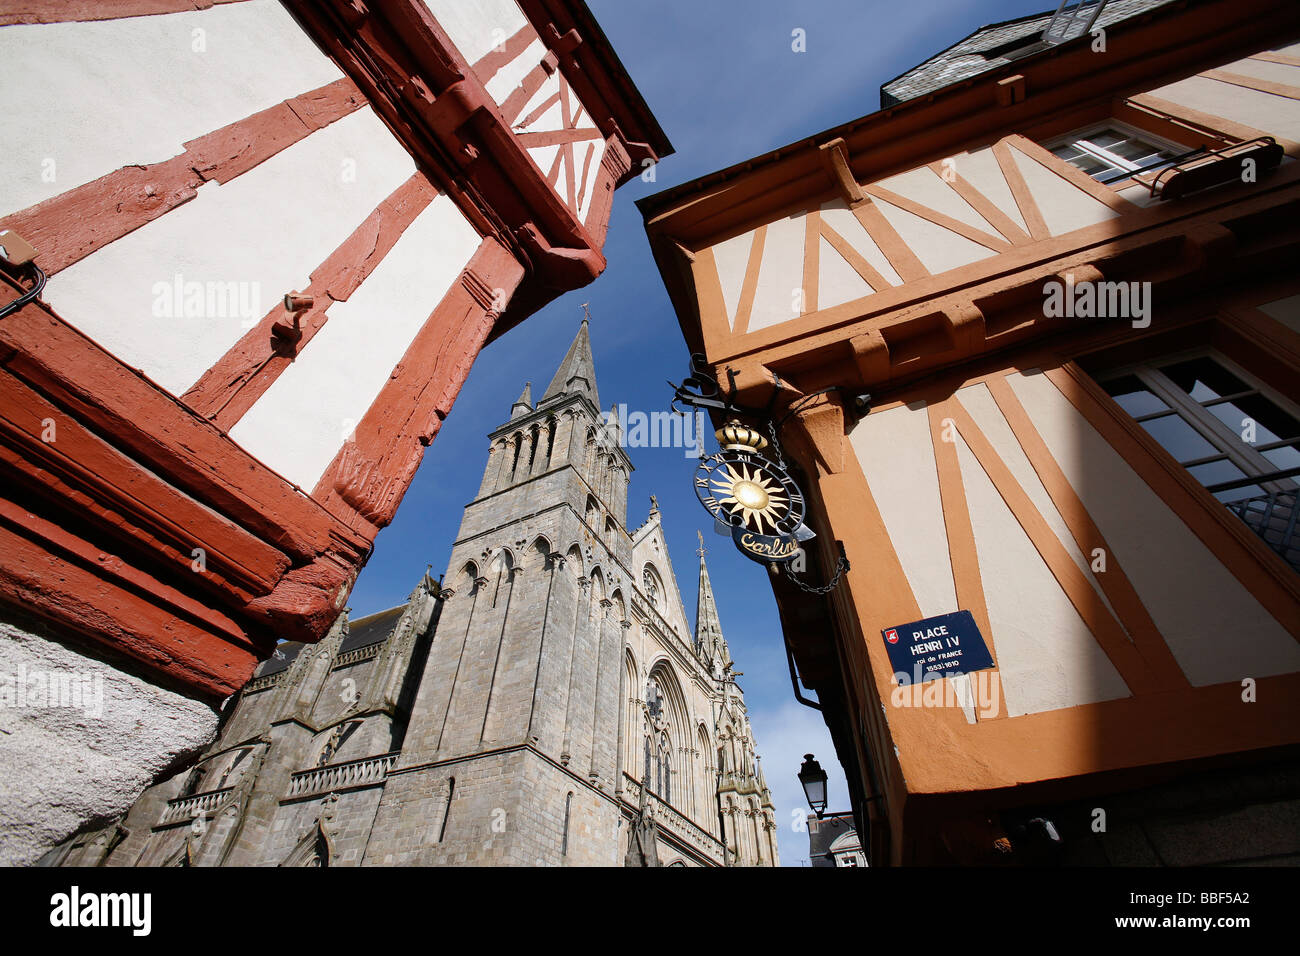 Old city center, cathedral, medieval architecture, Vannes, France Stock Photo